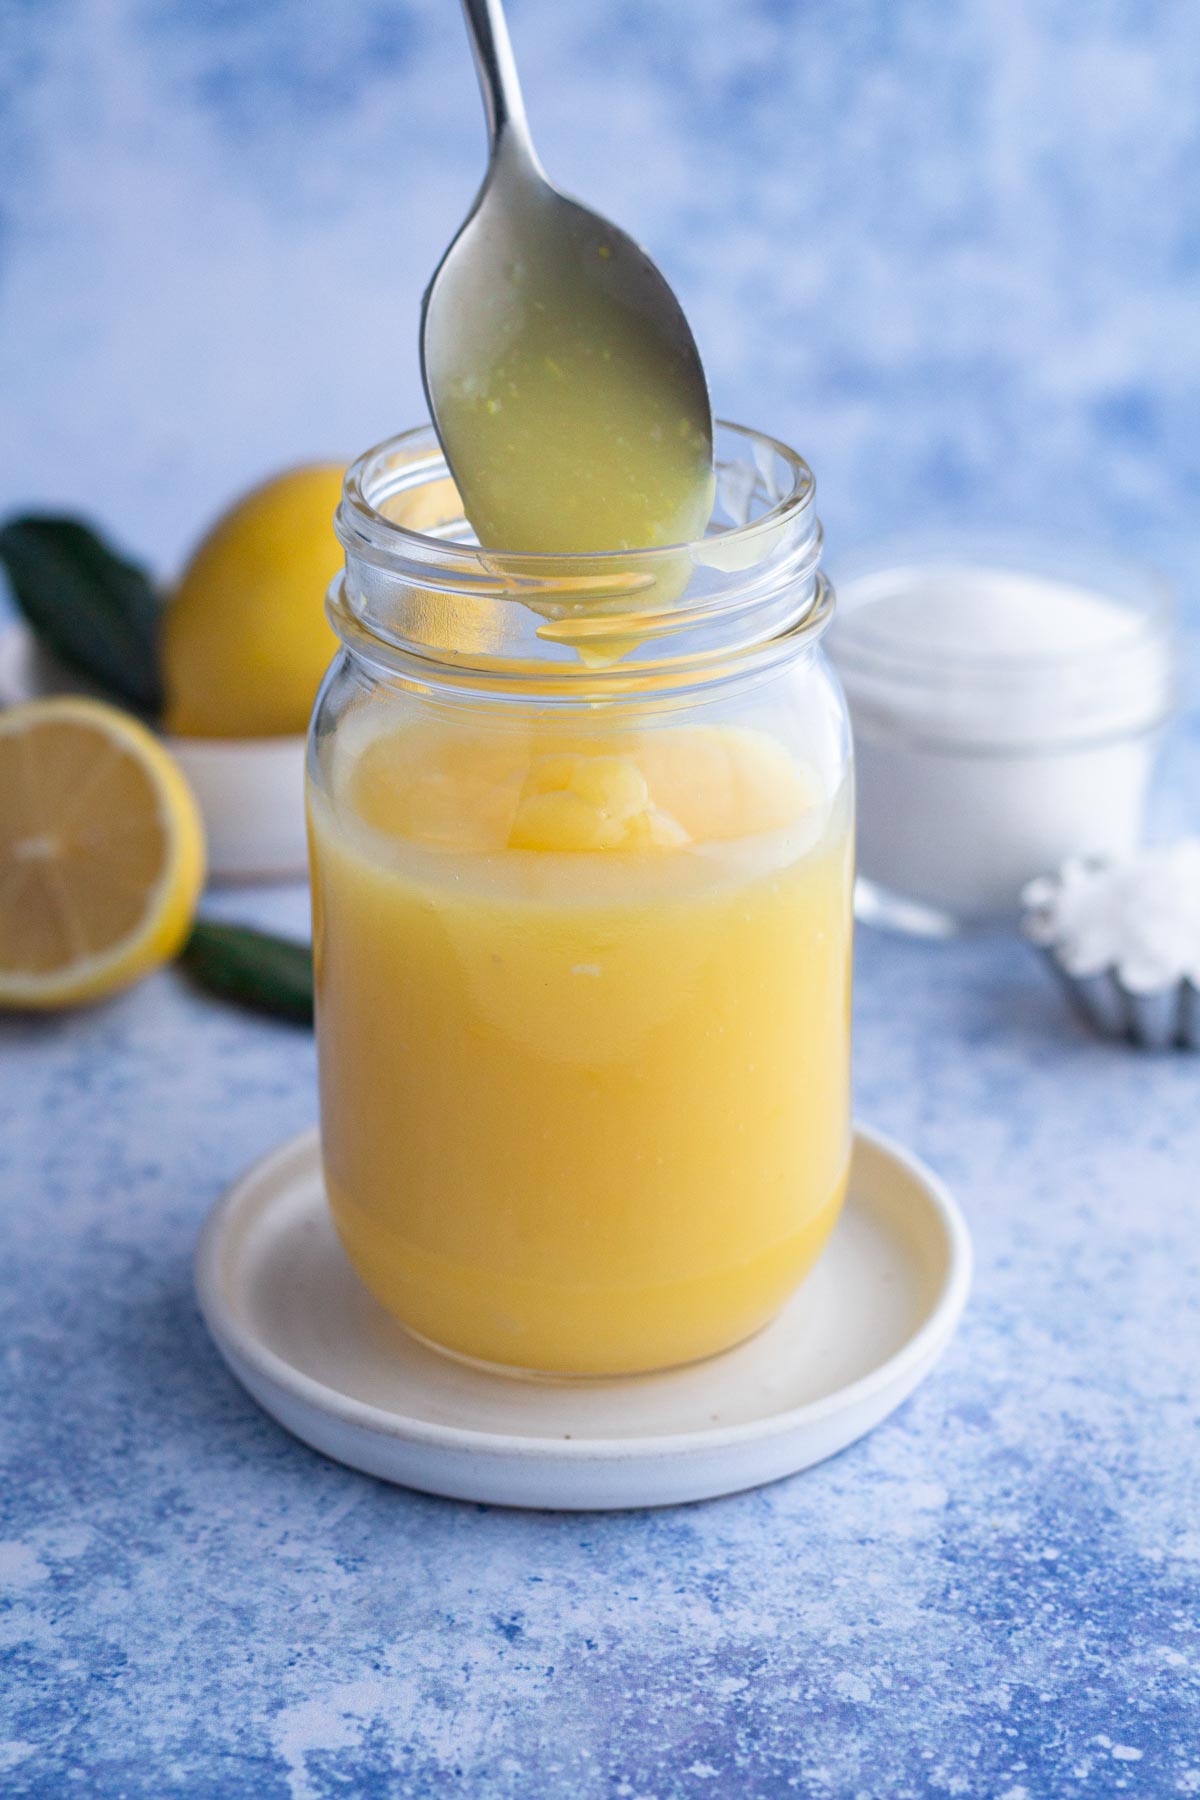 Spoon scooping lemon curd from a glass jar on a blue surface.